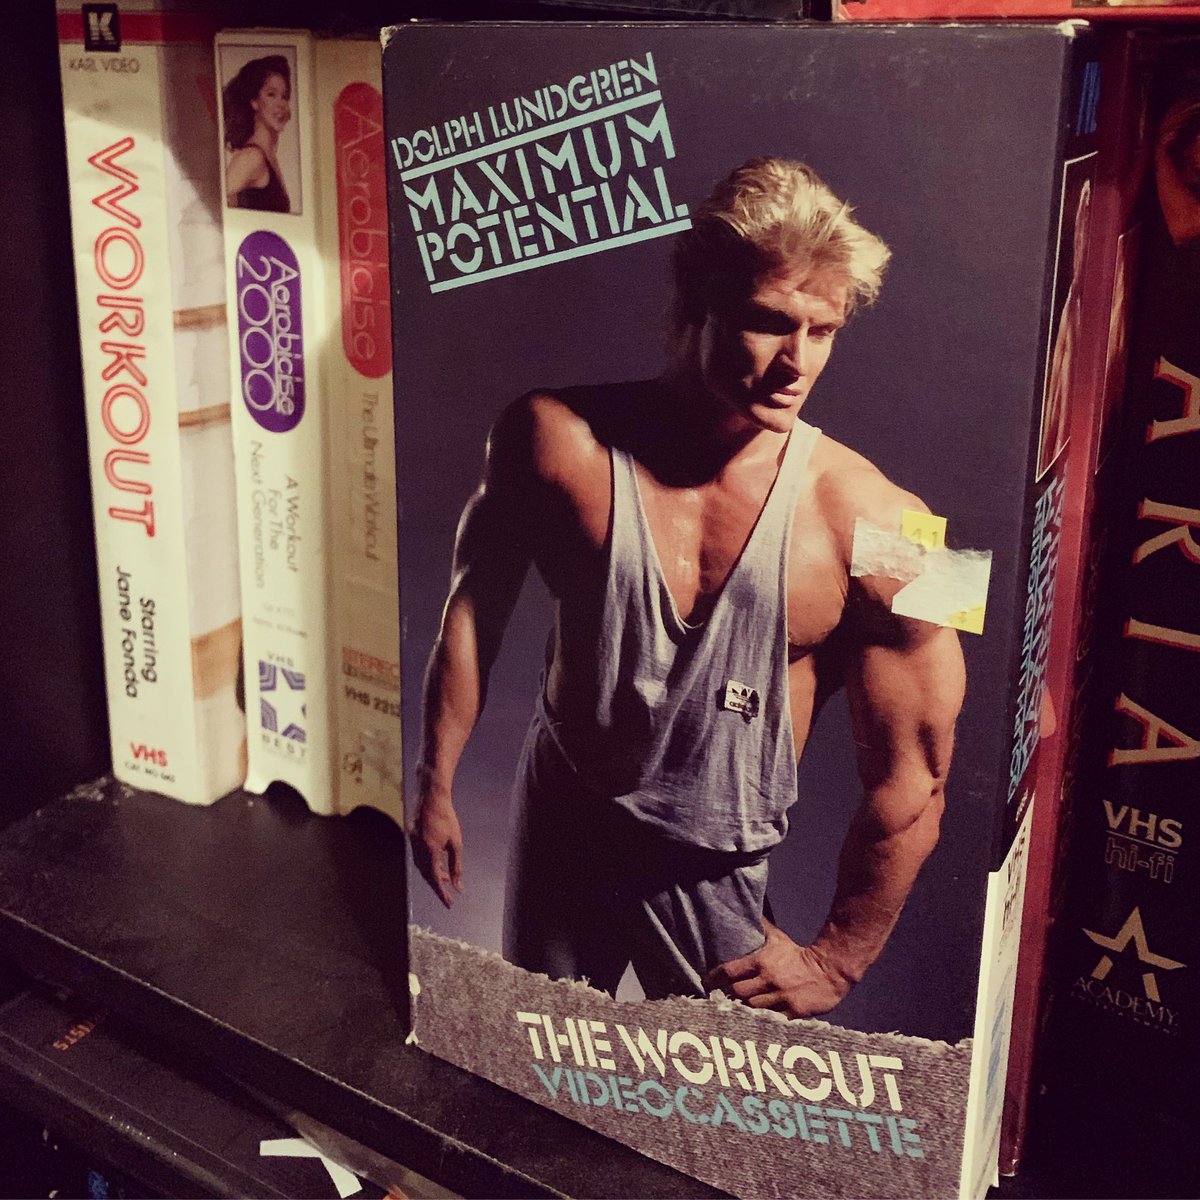 Time for Maximum Potential! I love how he talks about his favorite healthy foods❤️❤️❤️❤️ #80sworkoutvideo #workoutvideo #sexysaturday #vhs #dolphlundgren #dolphlundgrenworkout #maximumpotential